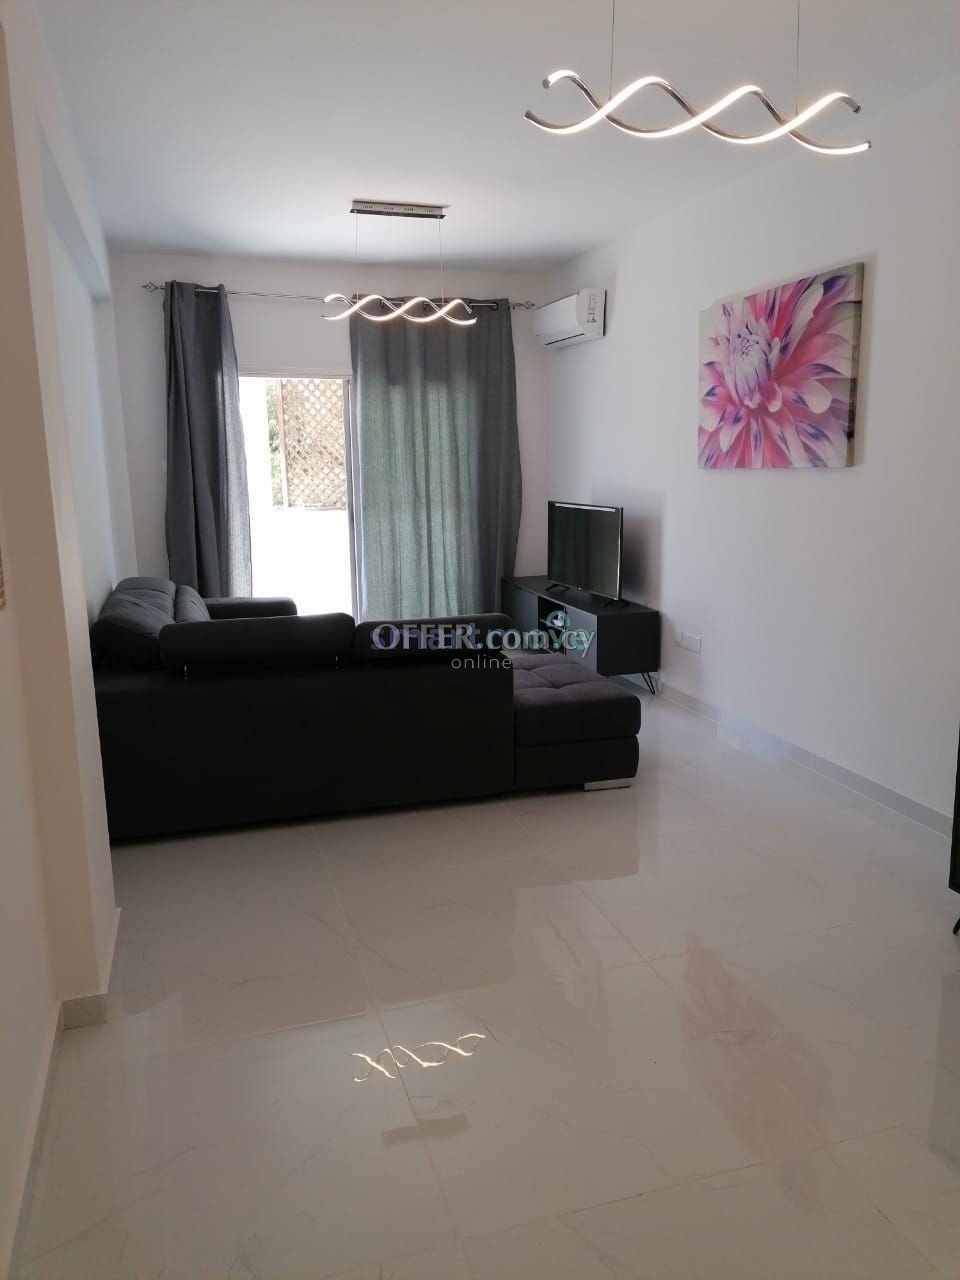 3 Bedroom Beach Front Apartment For Sale Limassol - 2